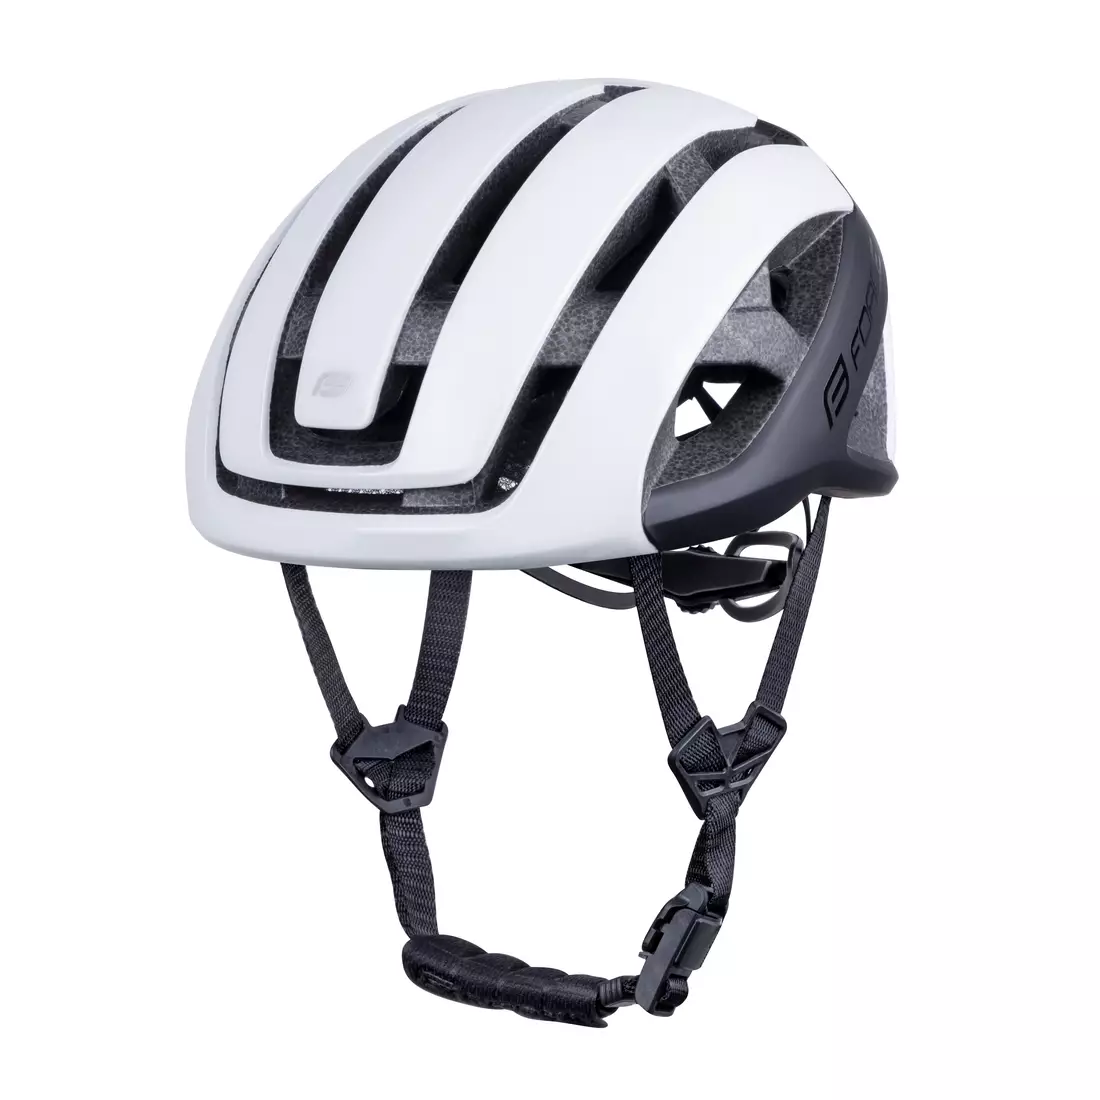 FORCE Bicycle helmet NEO, White and black, 902832